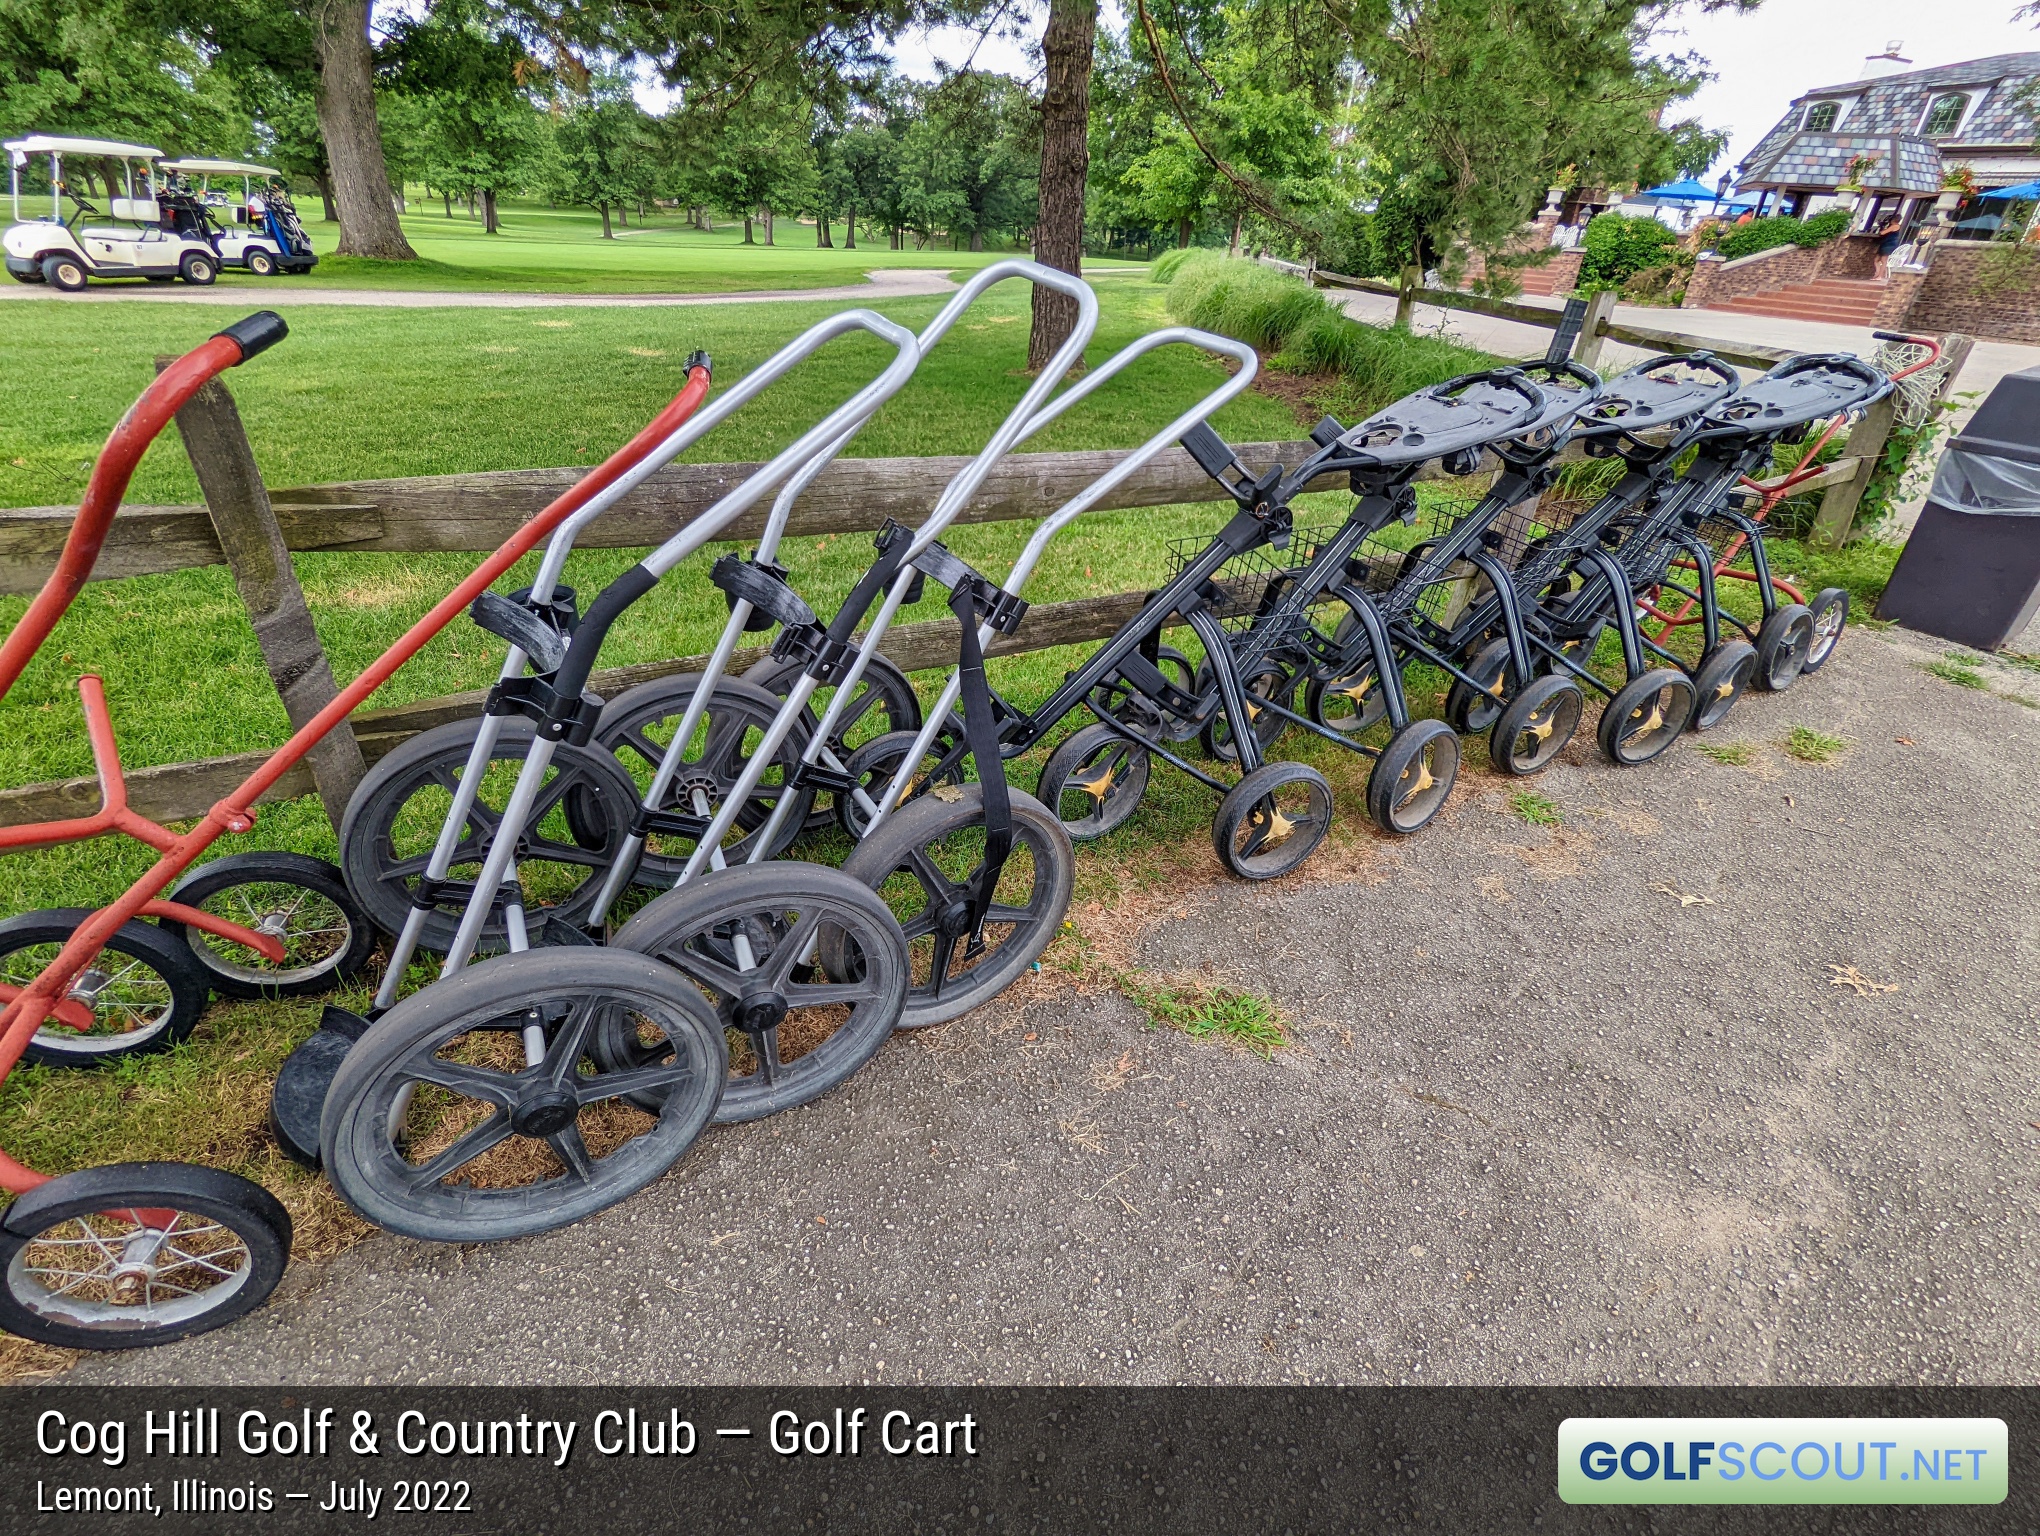 Photo of the golf carts at Cog Hill Course #3 in Lemont, Illinois. Push carts for rent at Cog Hill.